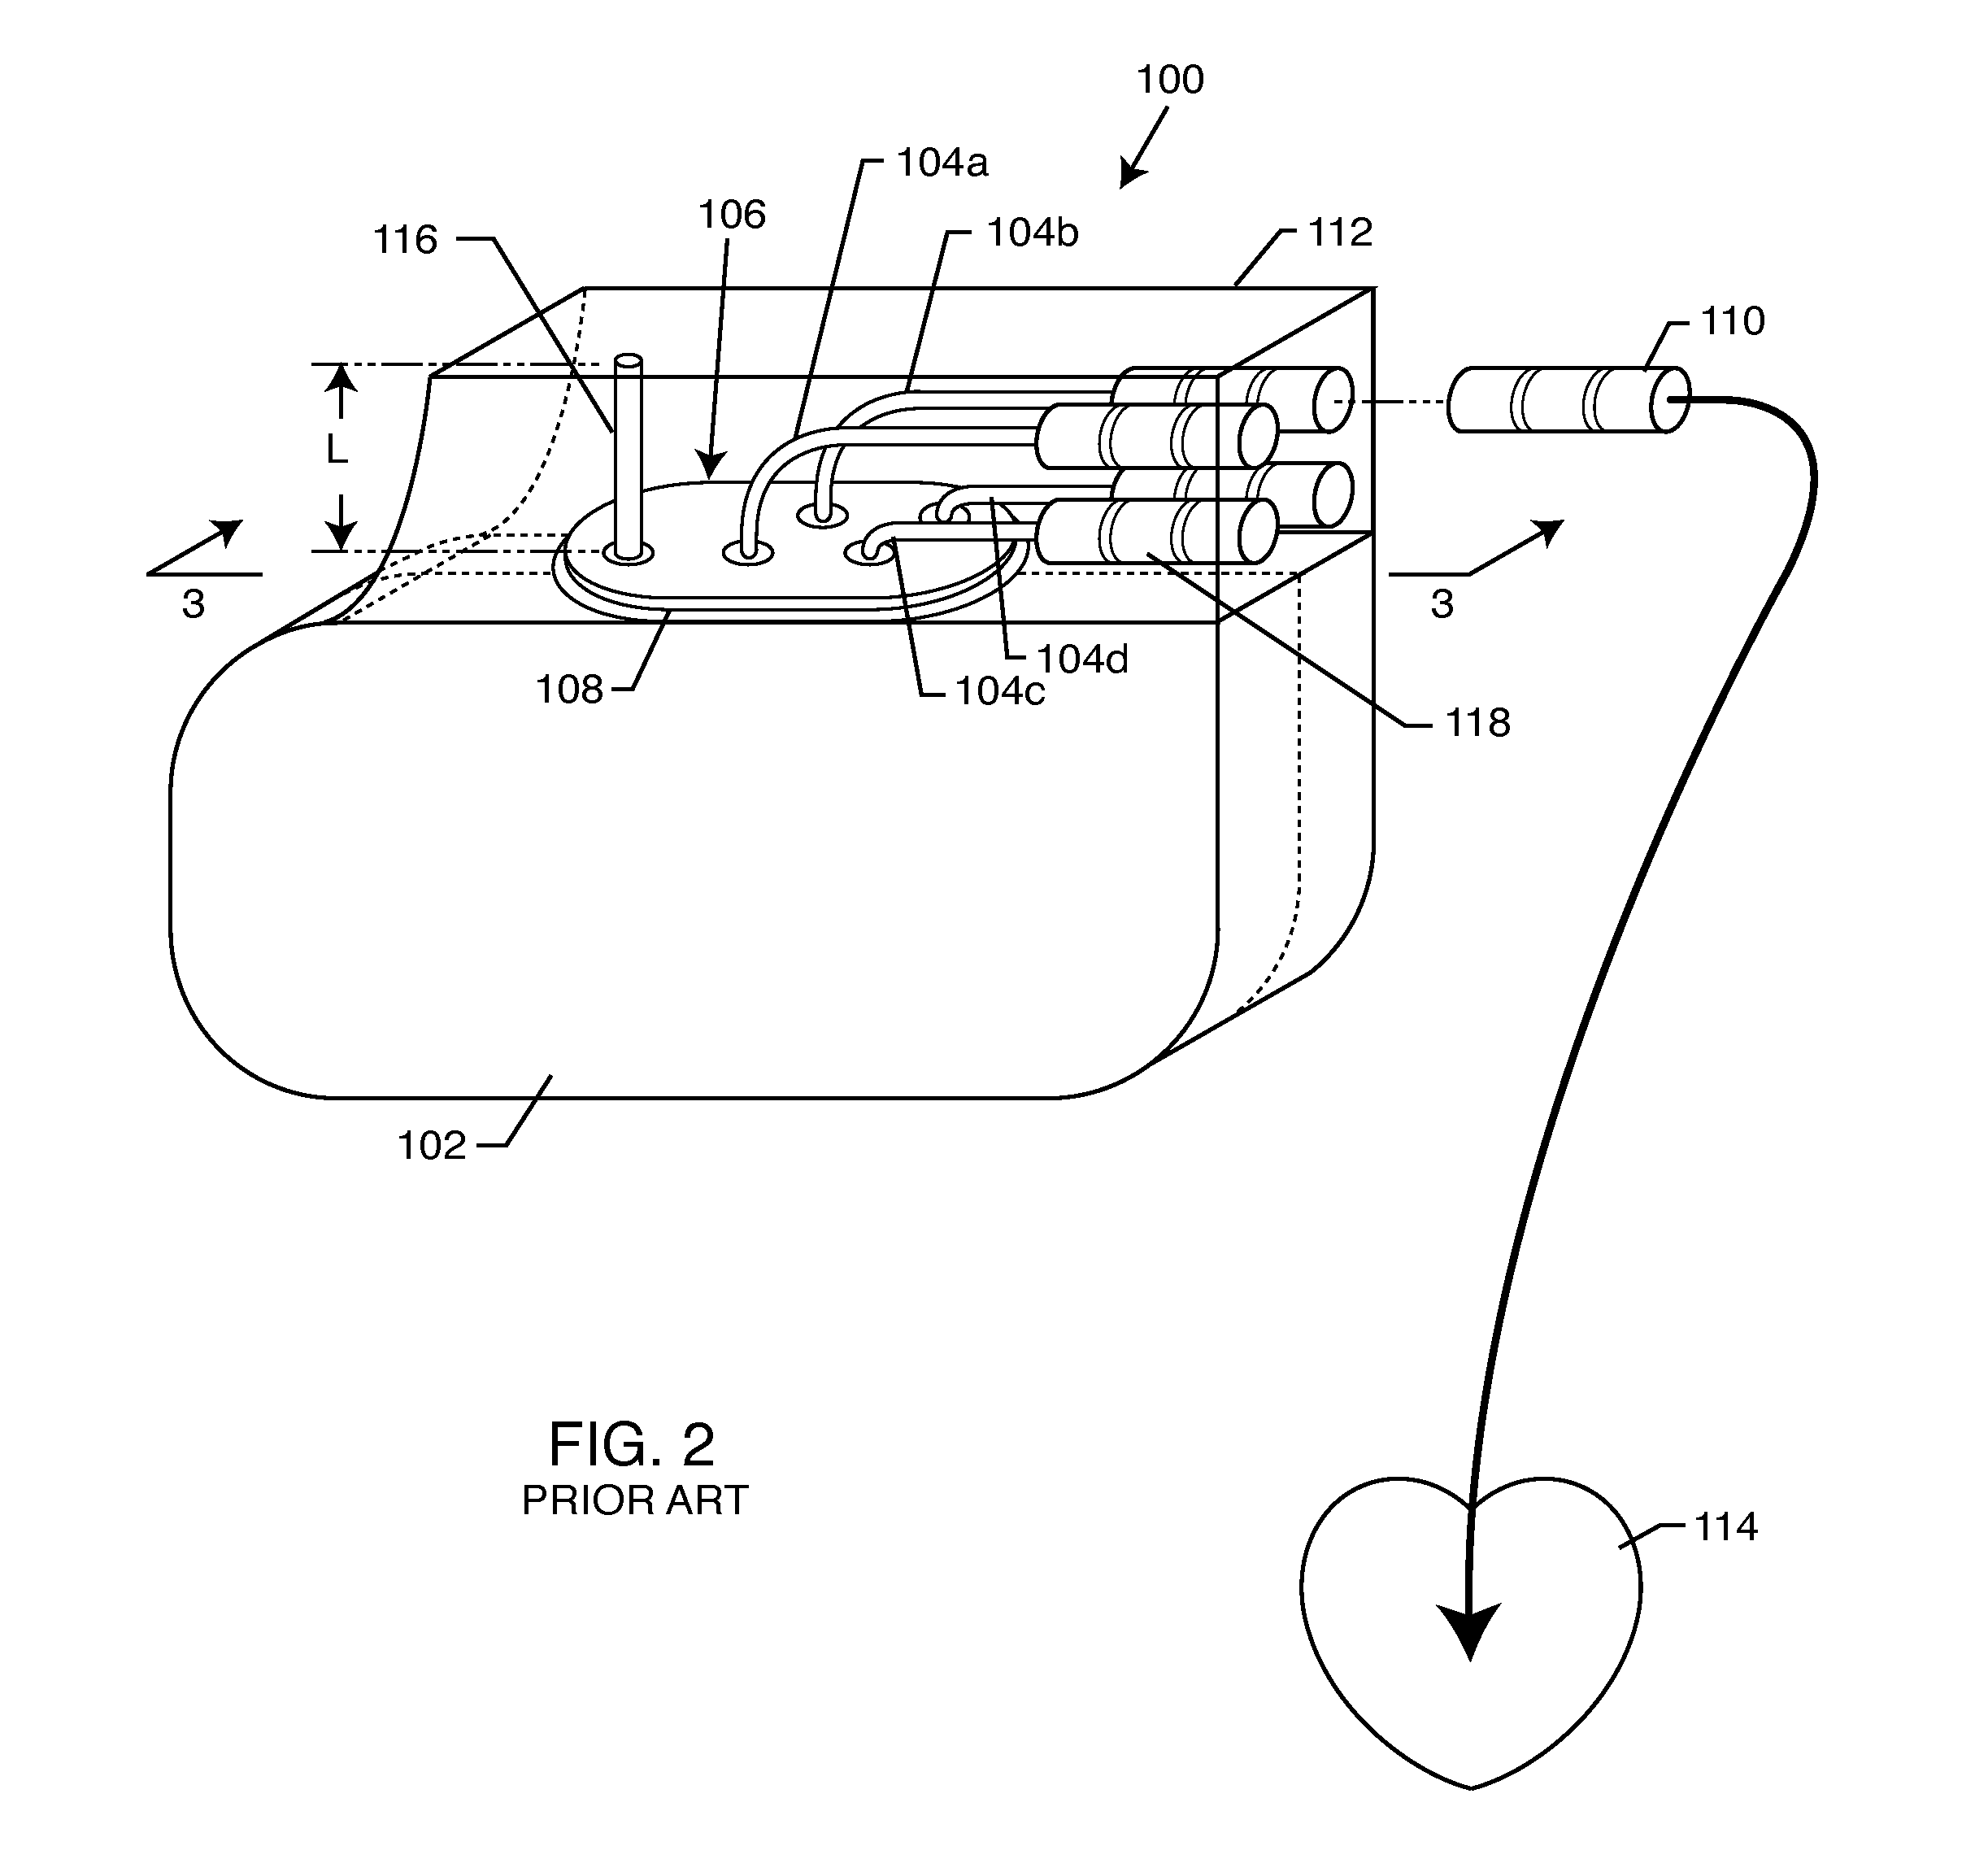 Integrated tank filter for a medical therapeutic device